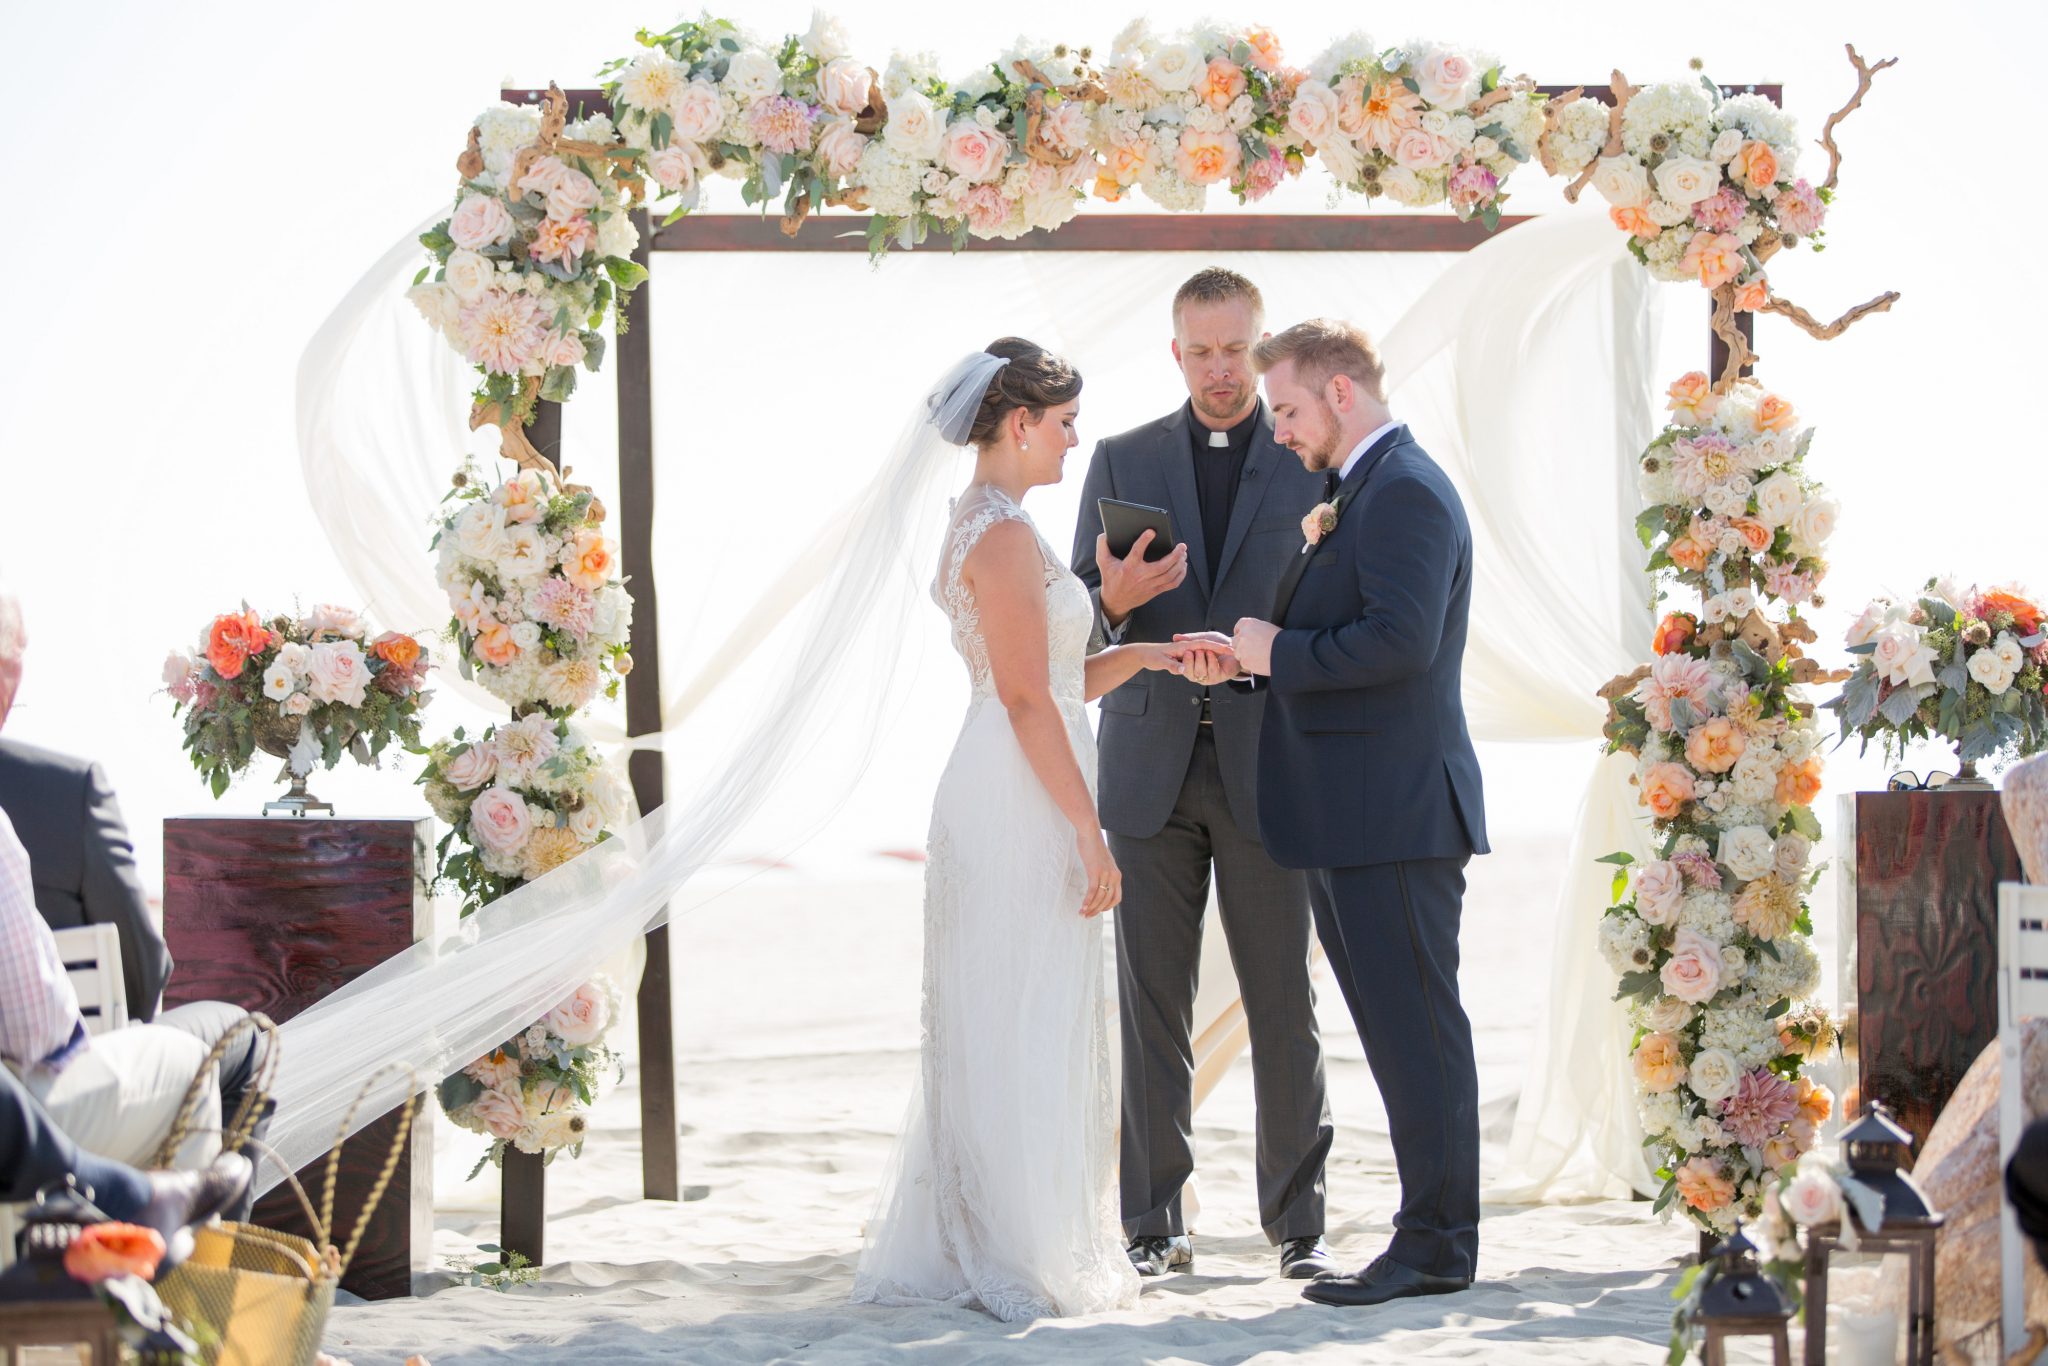 Leslie and Noah during their wedding ceremony on a stunning beach setting